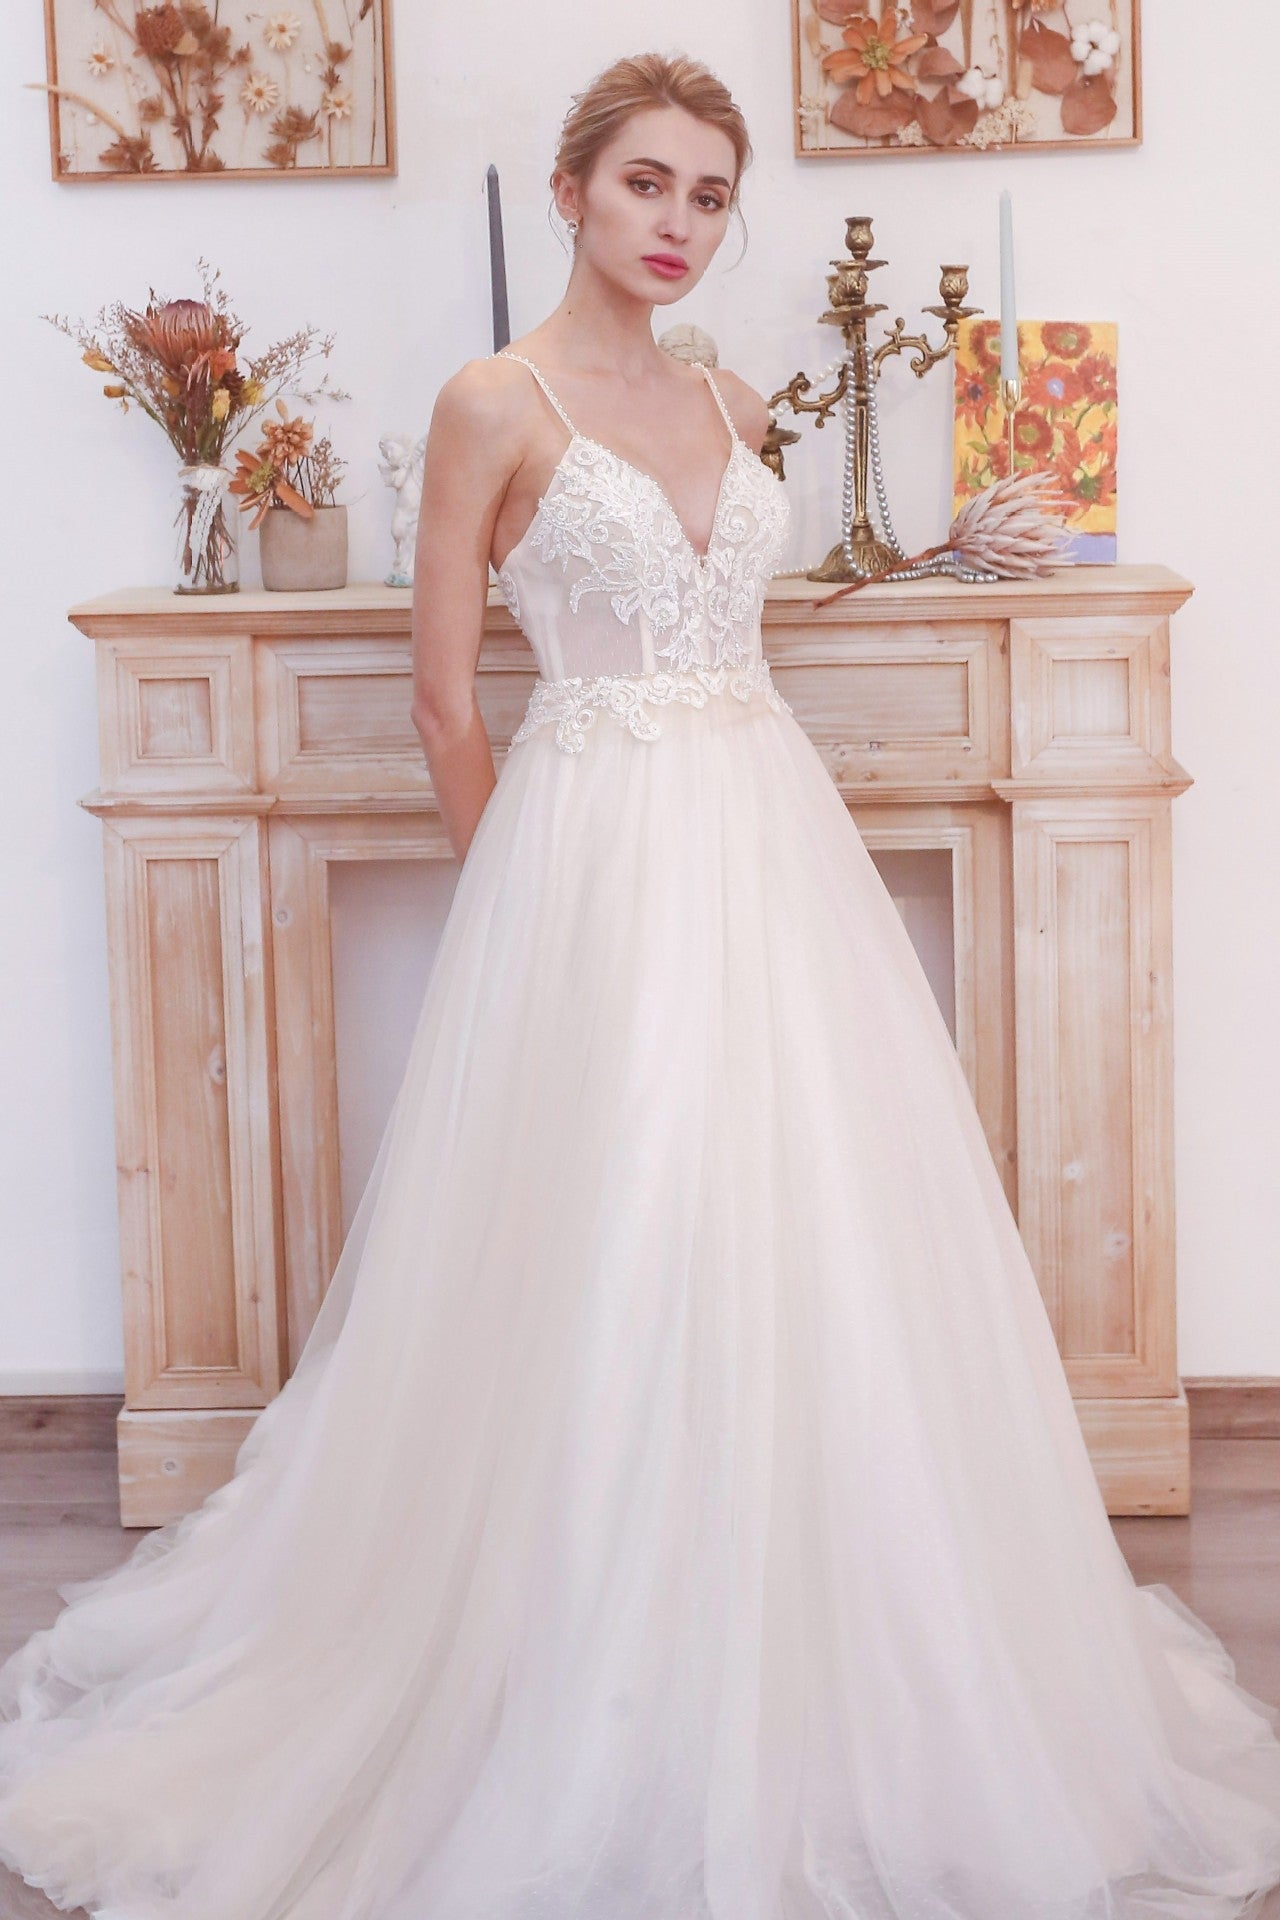 Plunge White A-line Long Wedding Dress with Pockets